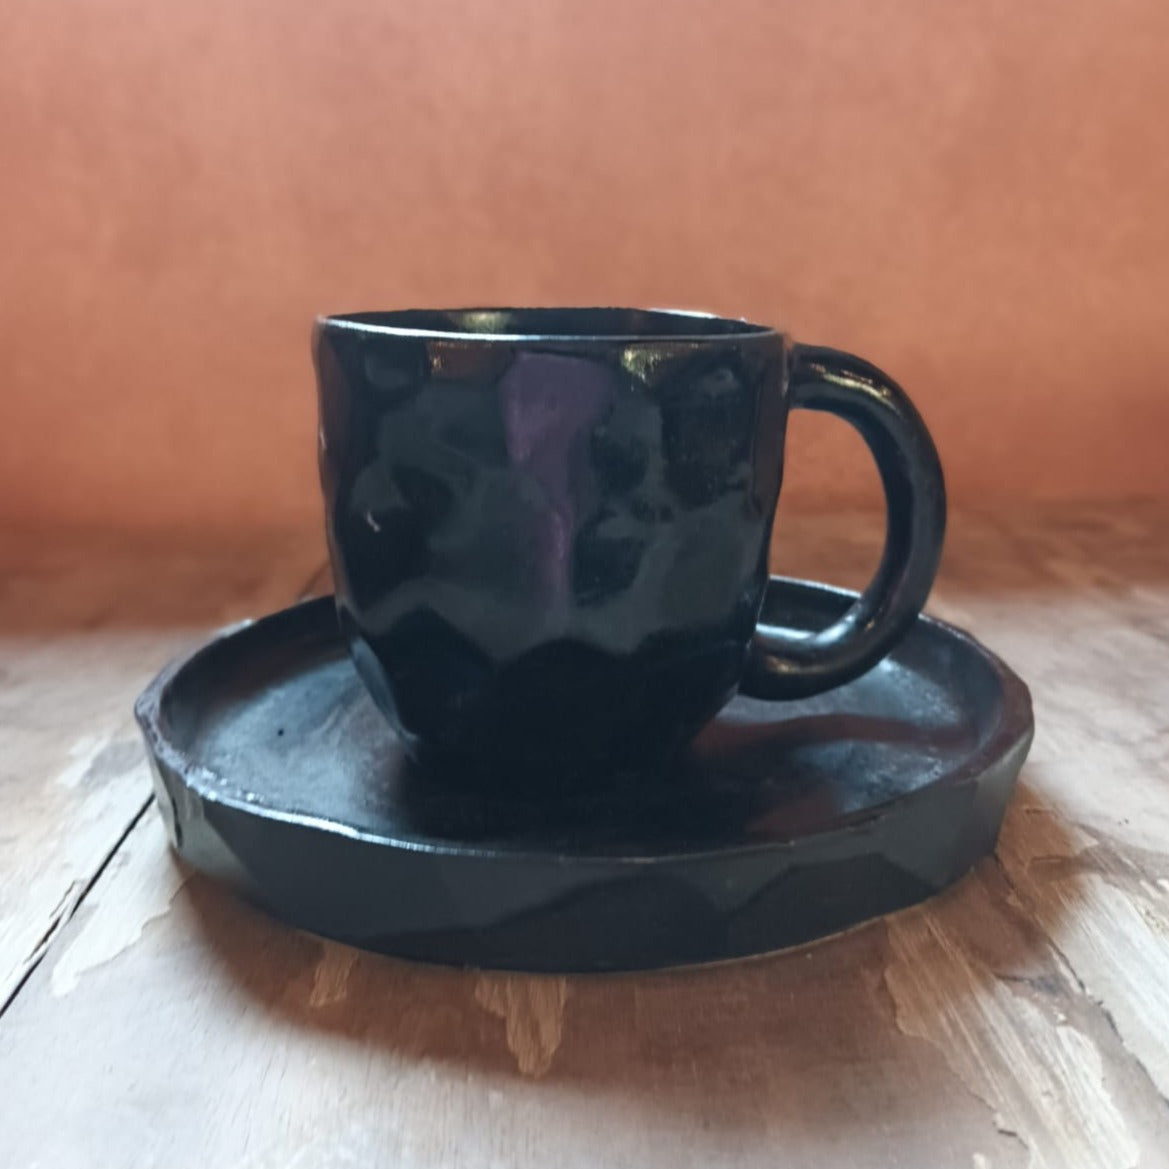 Faceted Cup and Saucer